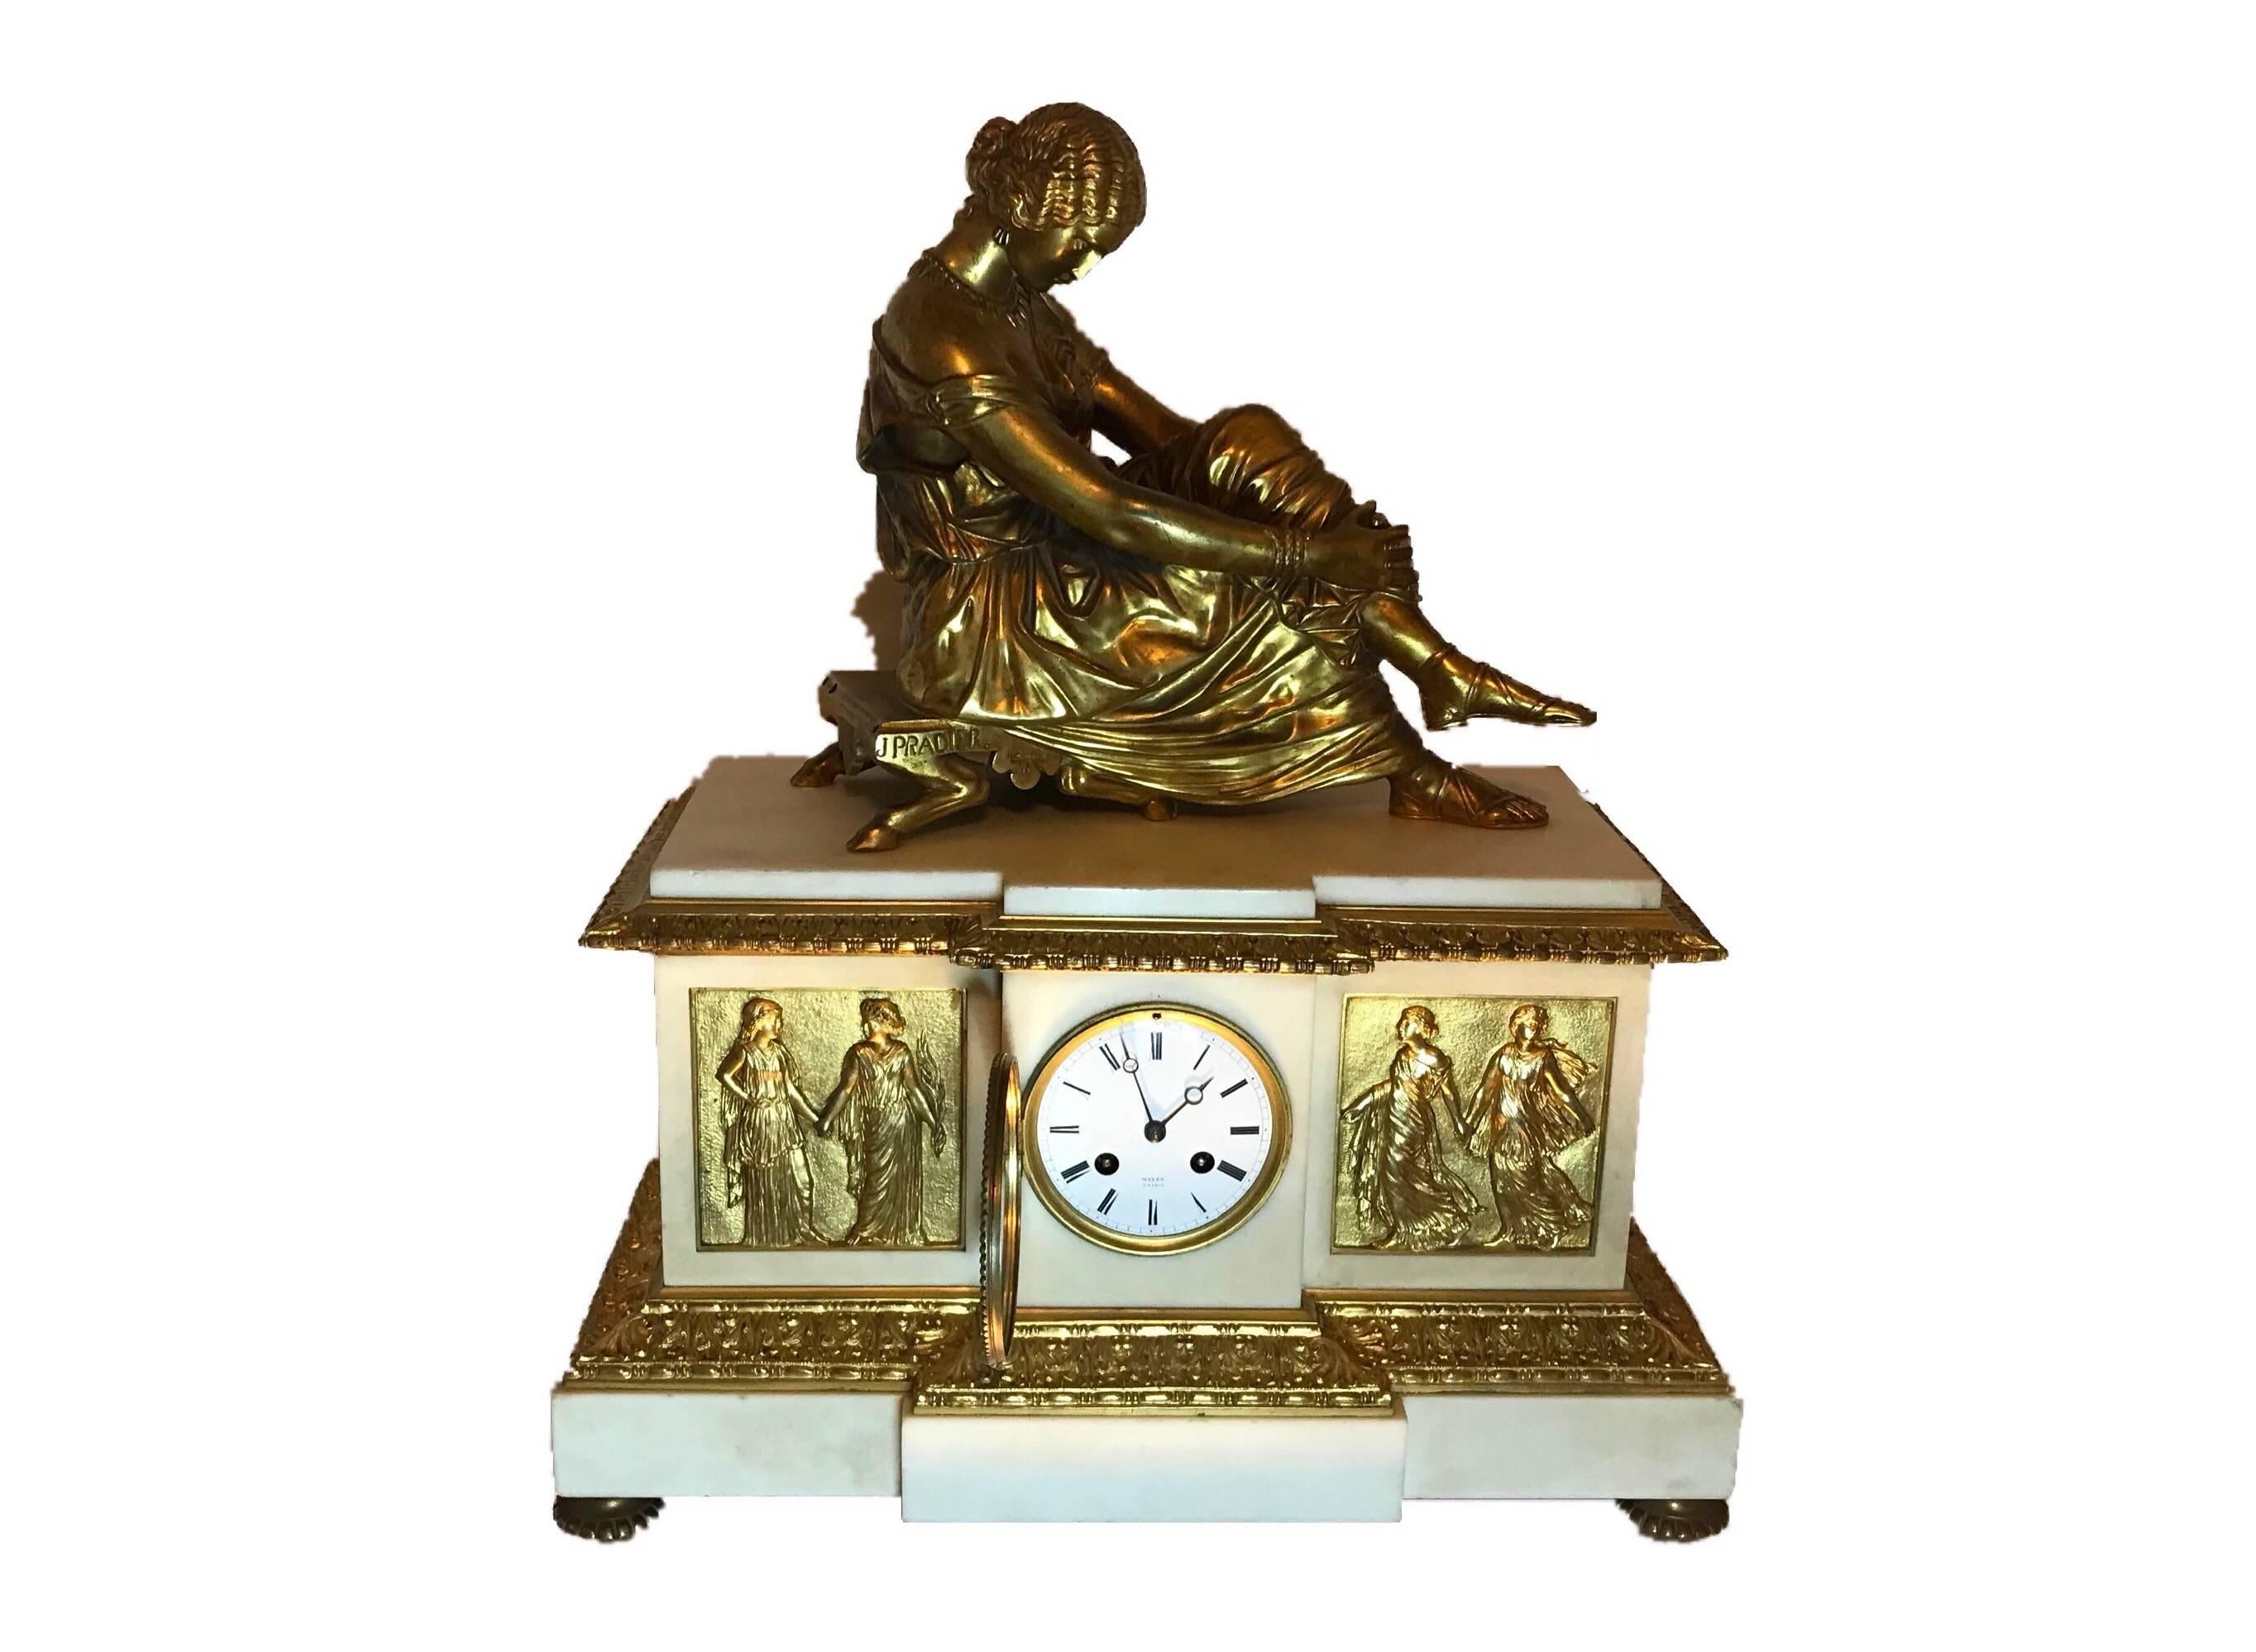 Superb signed gilt Napoleon III / Empire clock by Henri Picard, retailed by 'Mayer a Paris',
circa 1851.
The 8 day movement is stamped '1635' by Vincetti et Cie and shows the first Medaille D'argent stamp awarded to Vincetti et Cie from